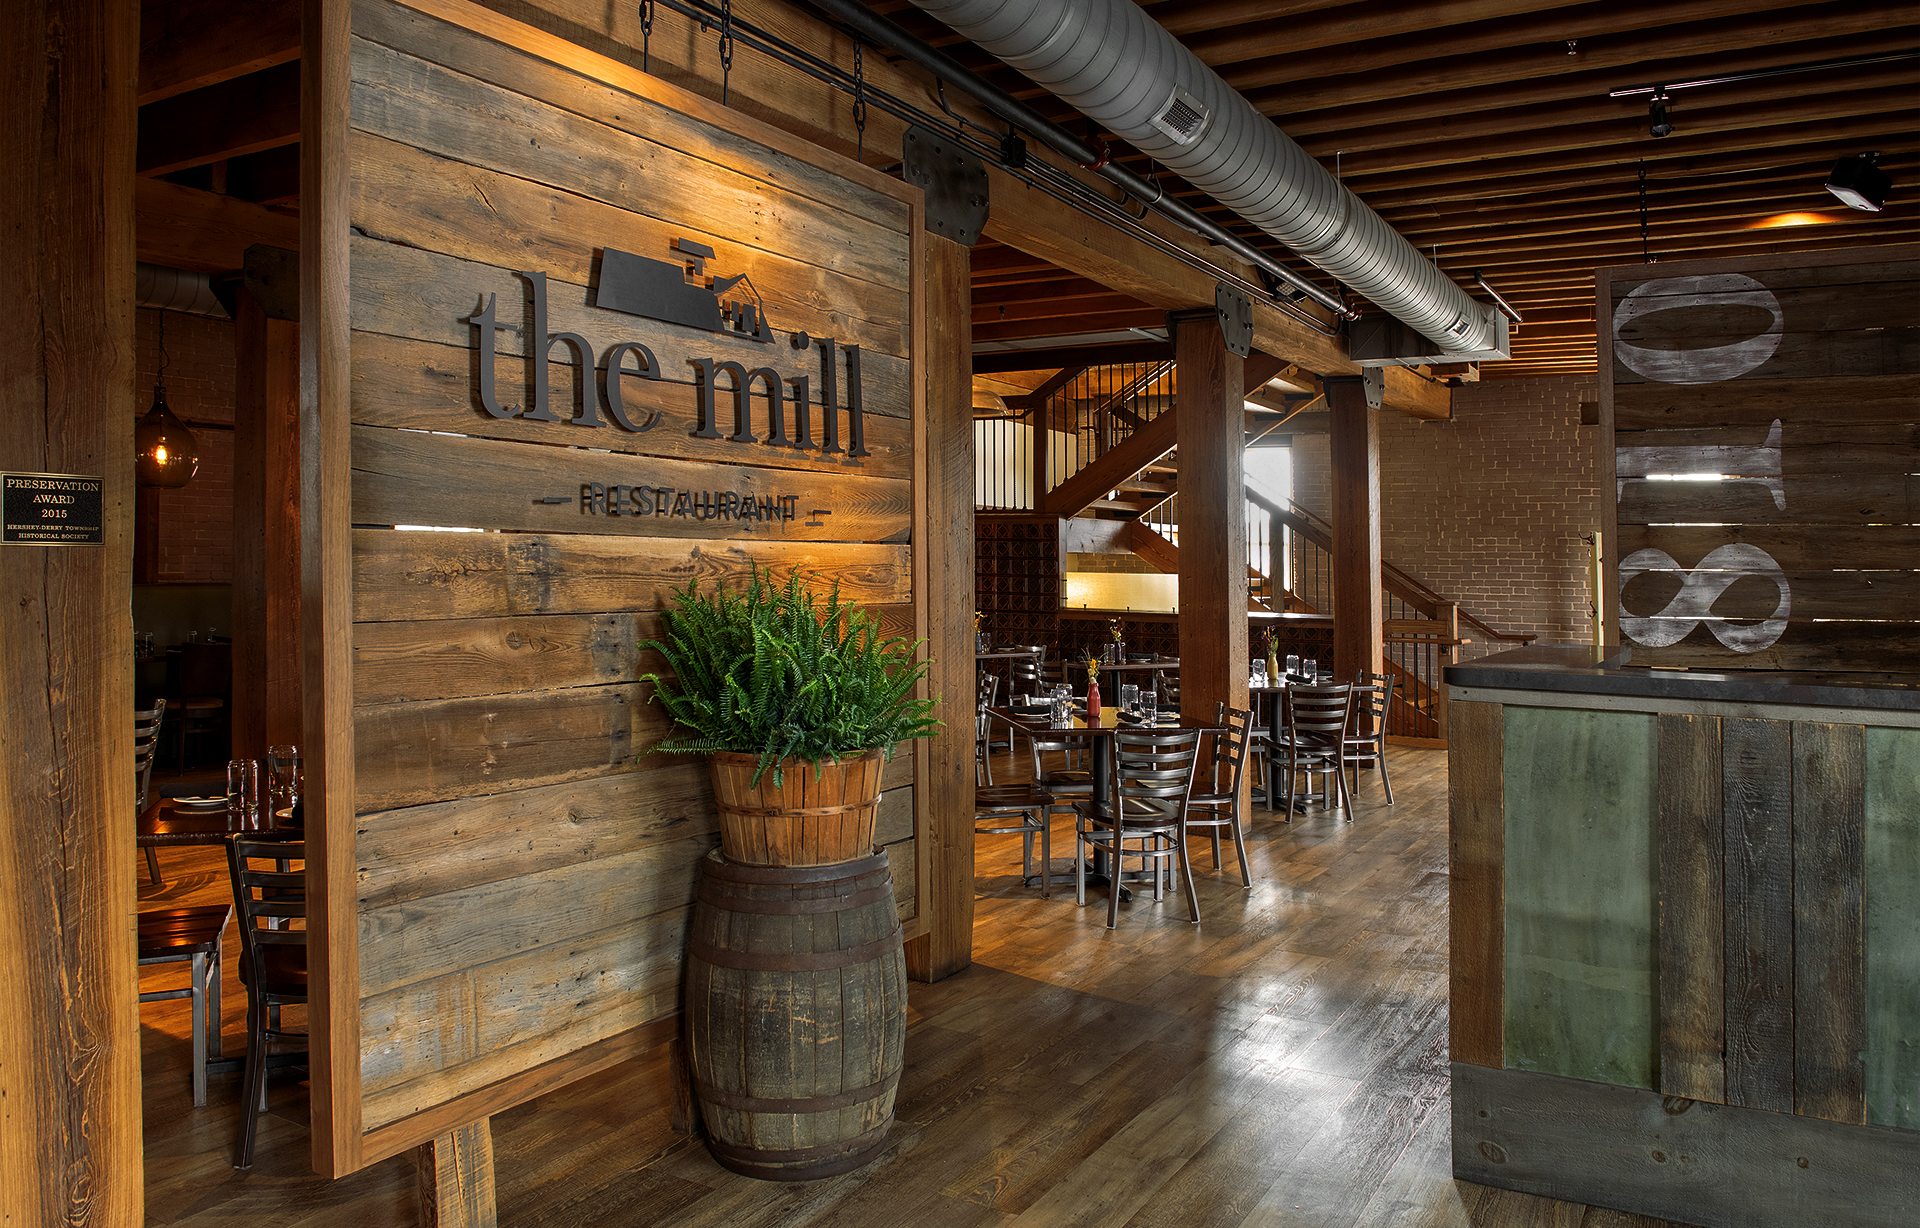 recognized-as-one-of-the-best-restaurants-by-locals-the-mill-in-hershey